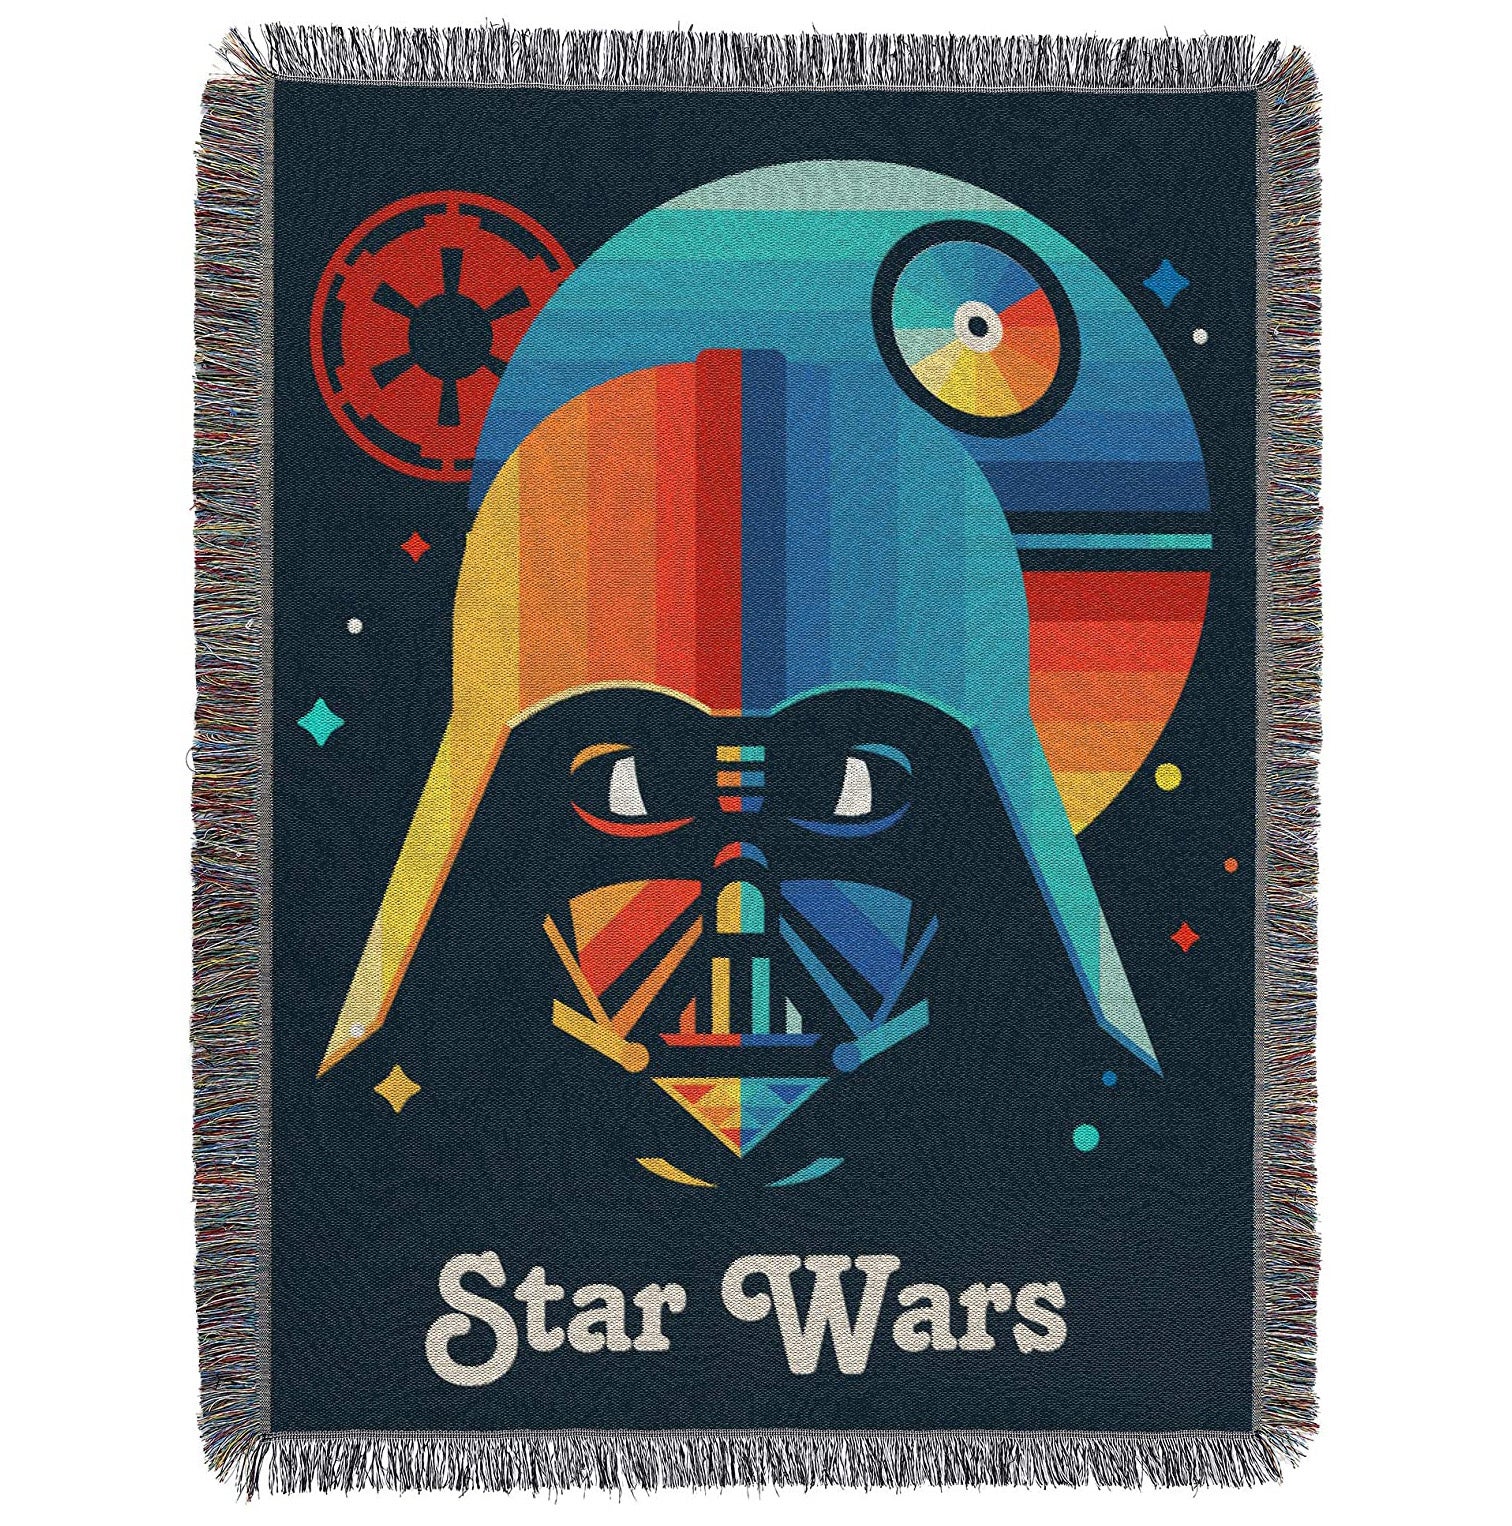 Star Wars Woven Tapestry Throw Blanket